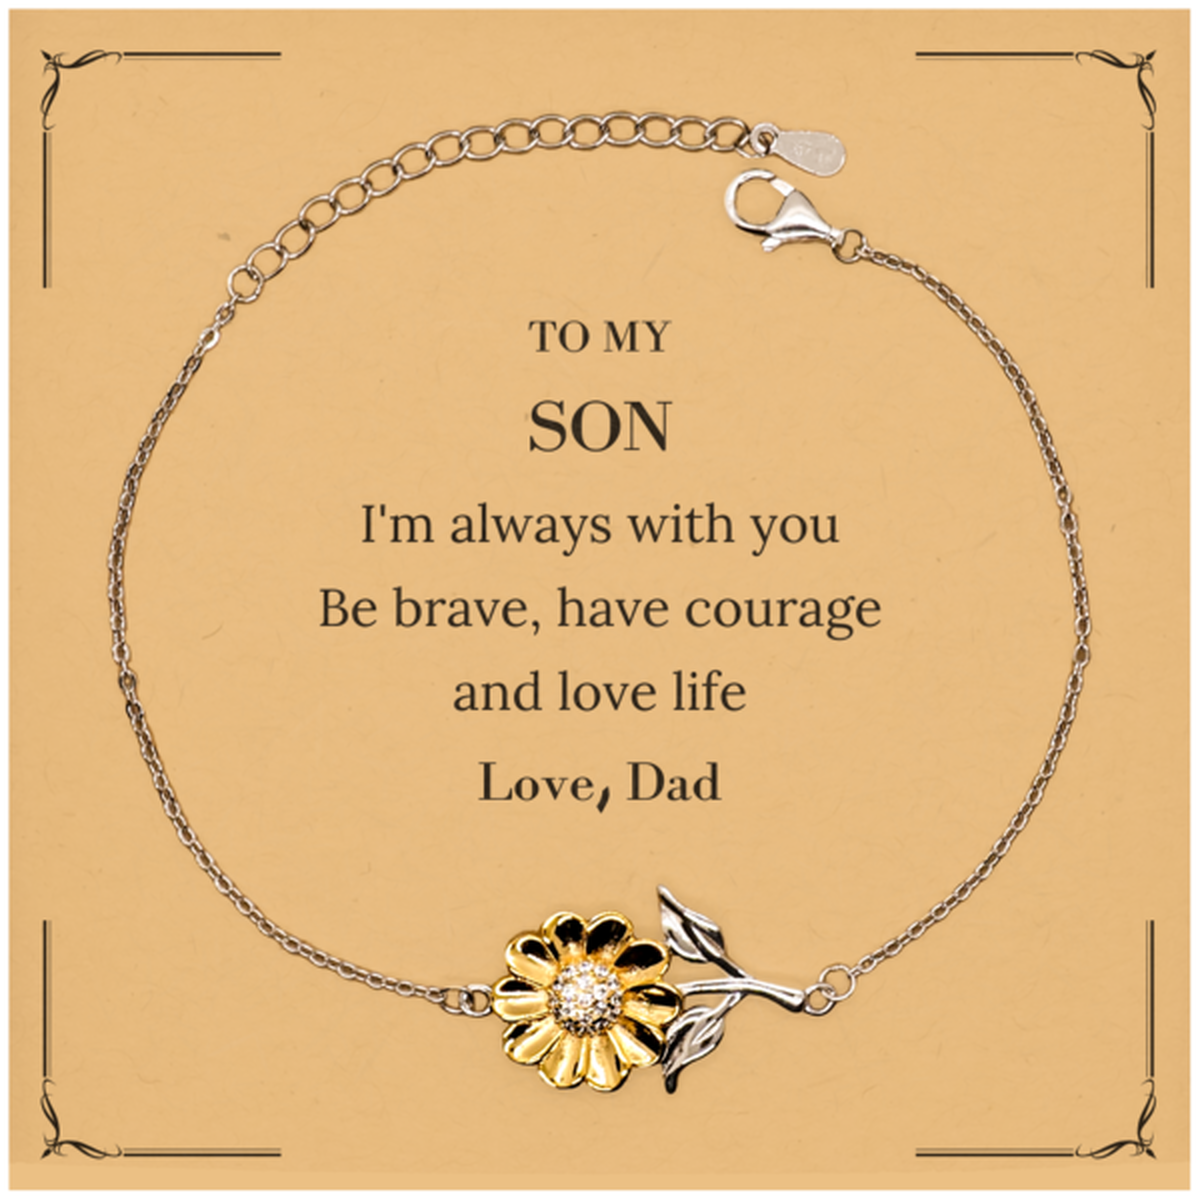 To My Son Gifts from Dad, Unique Sunflower Bracelet Inspirational Christmas Birthday Graduation Gifts for Son I'm always with you. Be brave, have courage and love life. Love, Dad